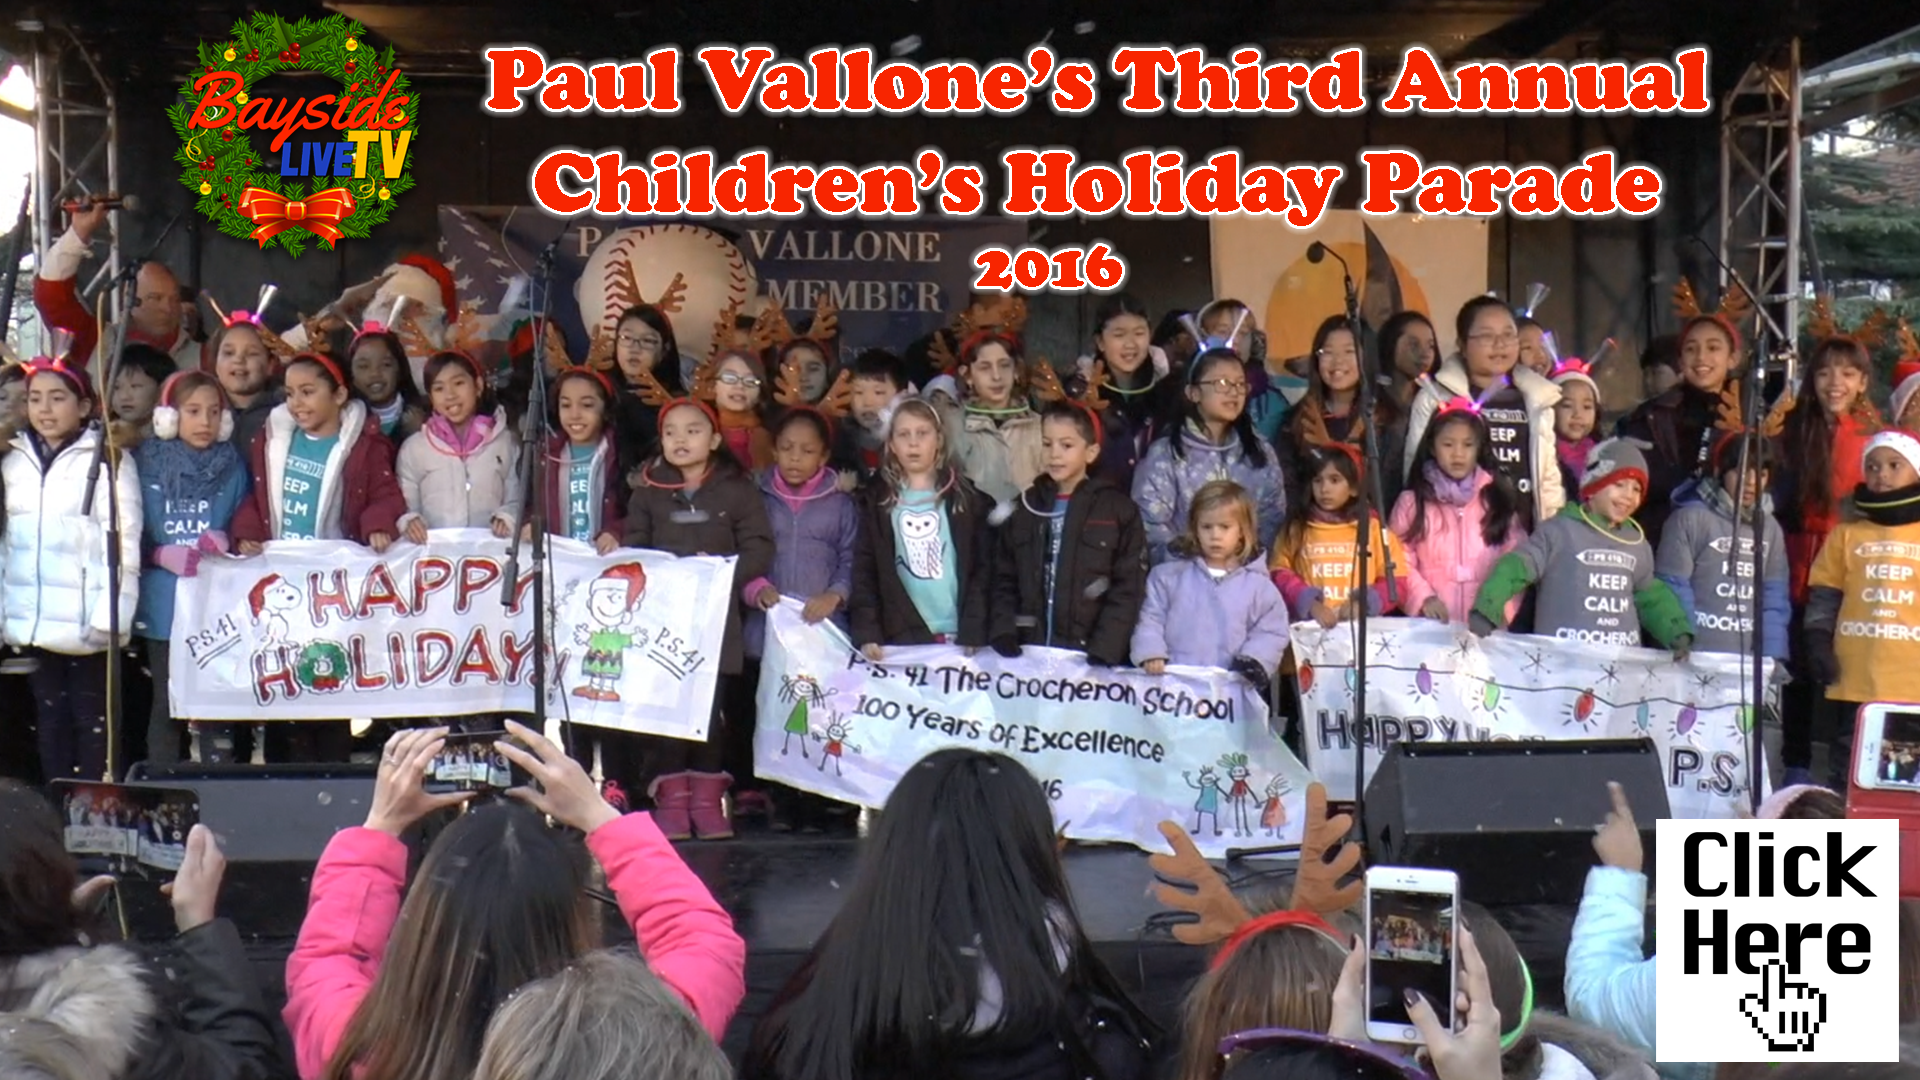 2016 Children’s Holiday Parade